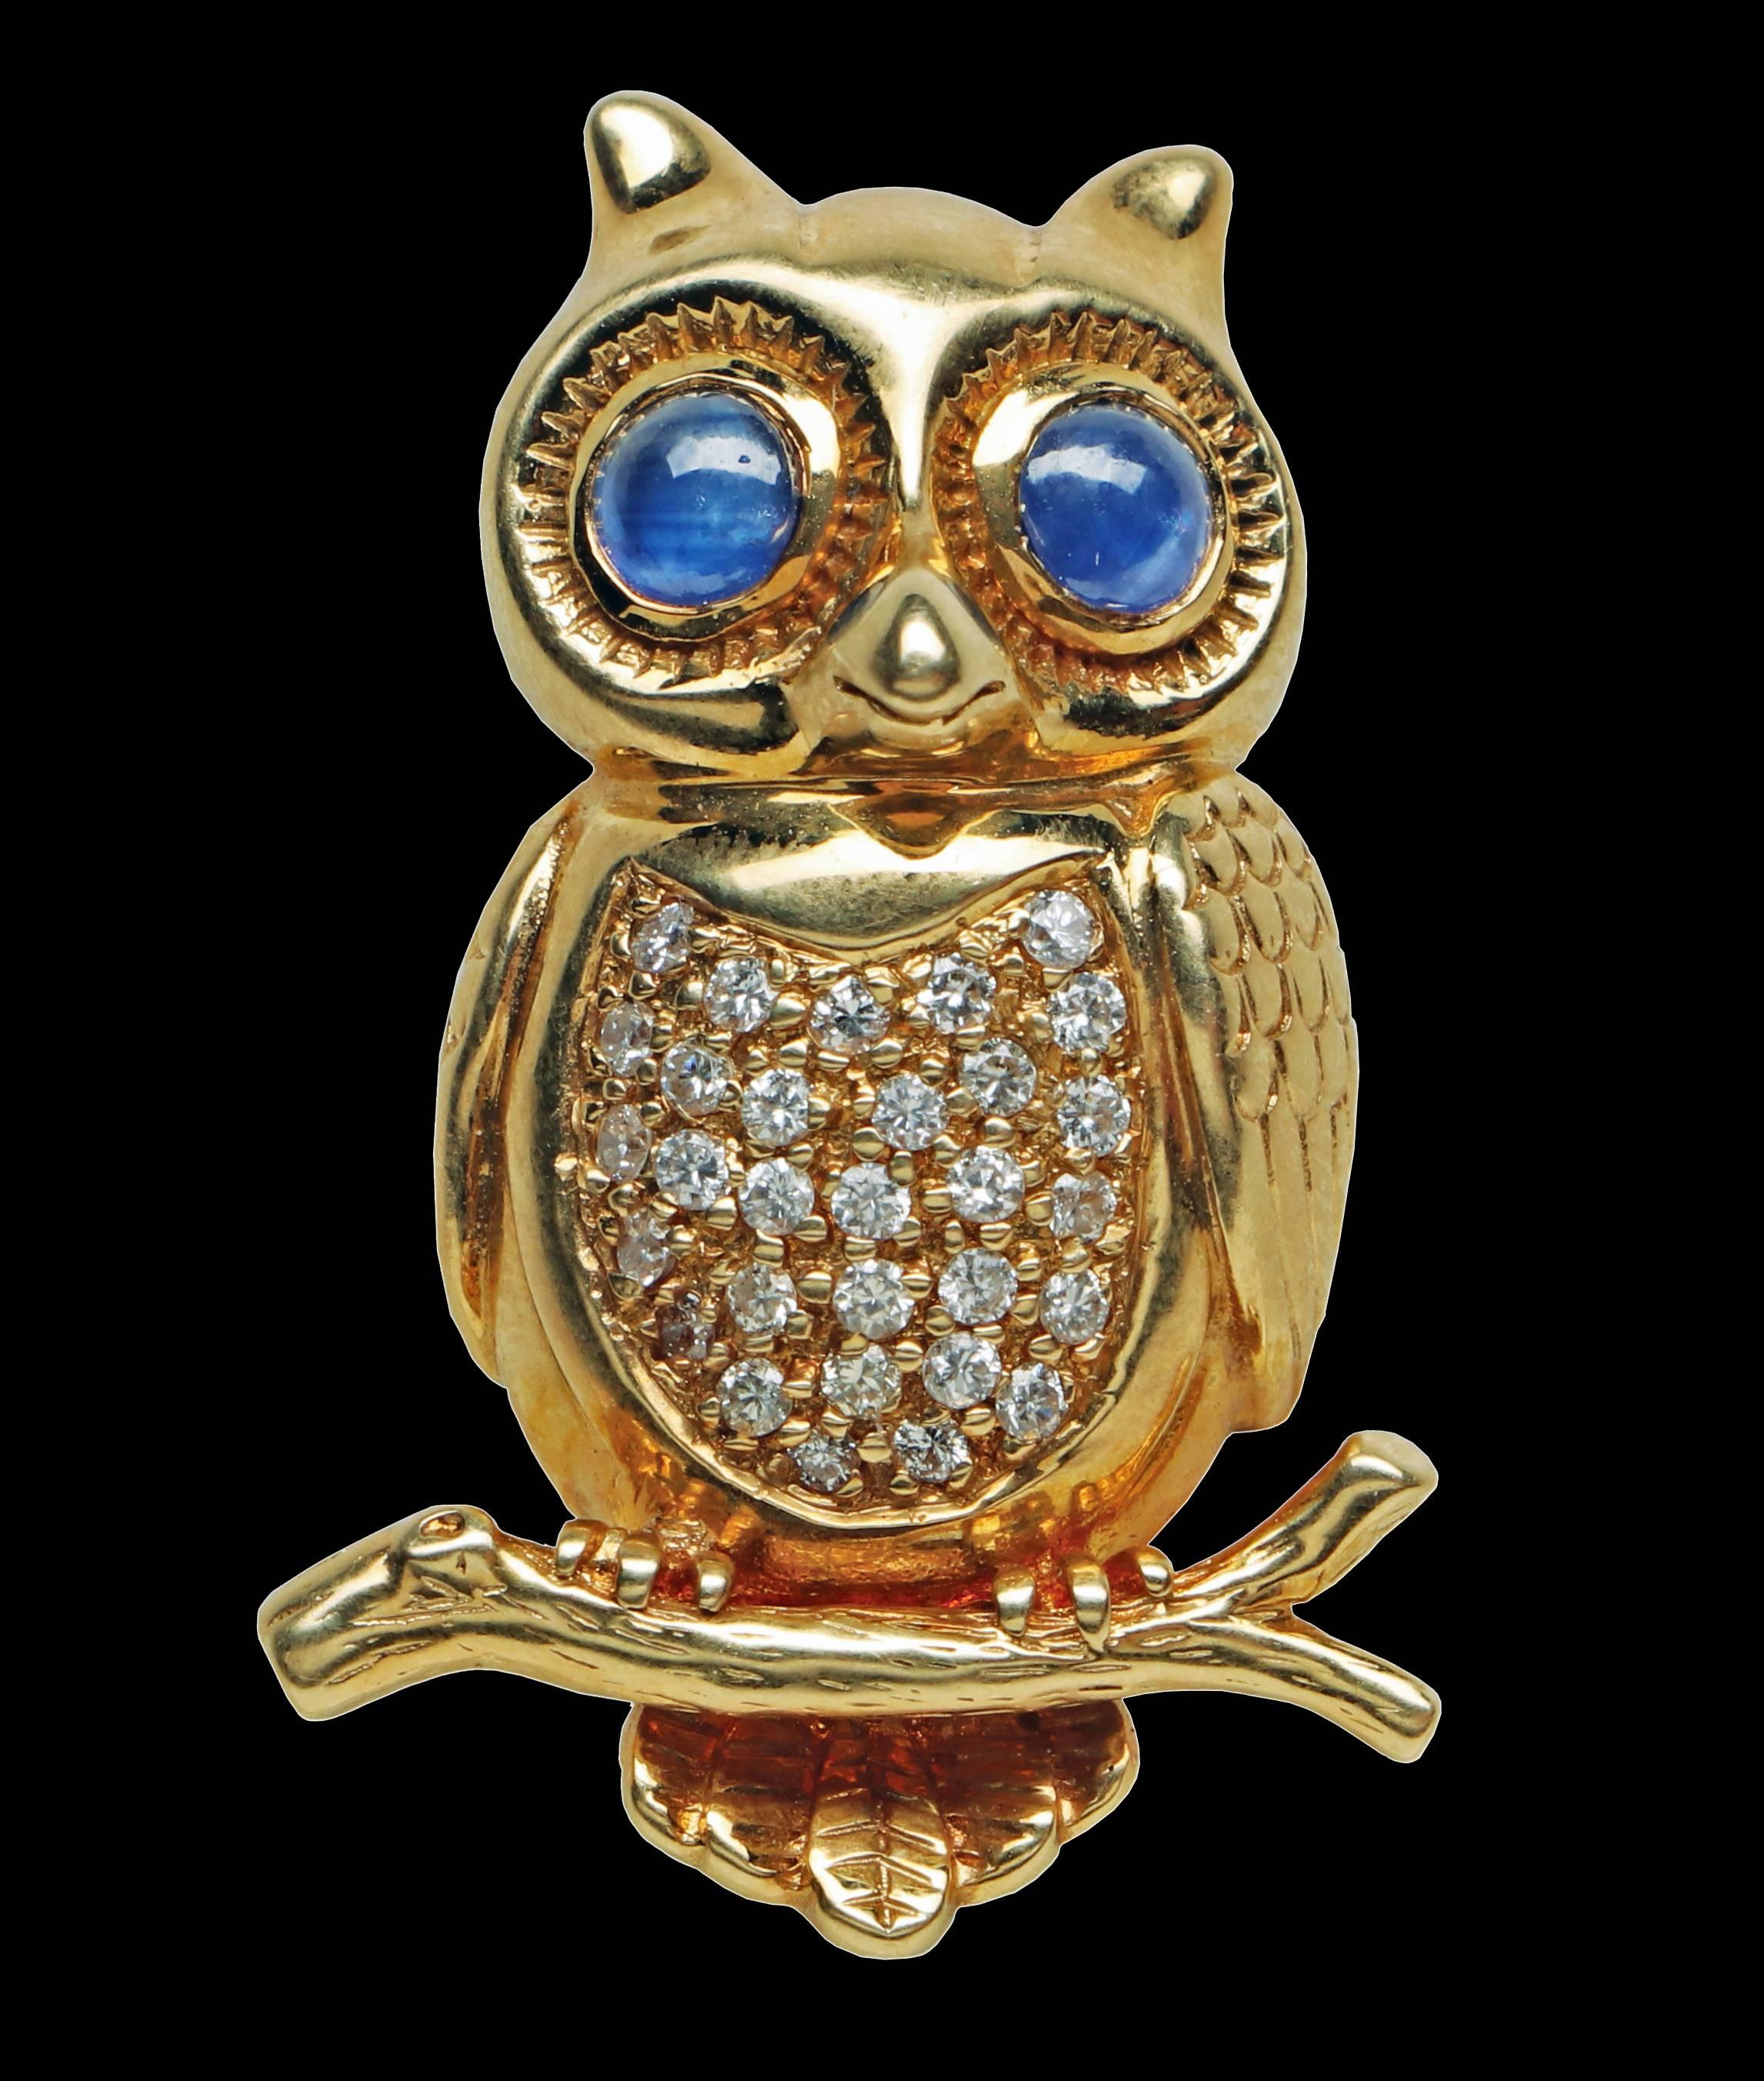 Boucheron 18K Diamond and Sapphire Owl Brooch Pin, 20th century. The owl with diamond pave set body and cabochon sapphire eyes. Measures: 1 ¼ x 7/8 inches. Weight: 9.24 grams. Signed Boucheron and English import marks. Boucheron case.  